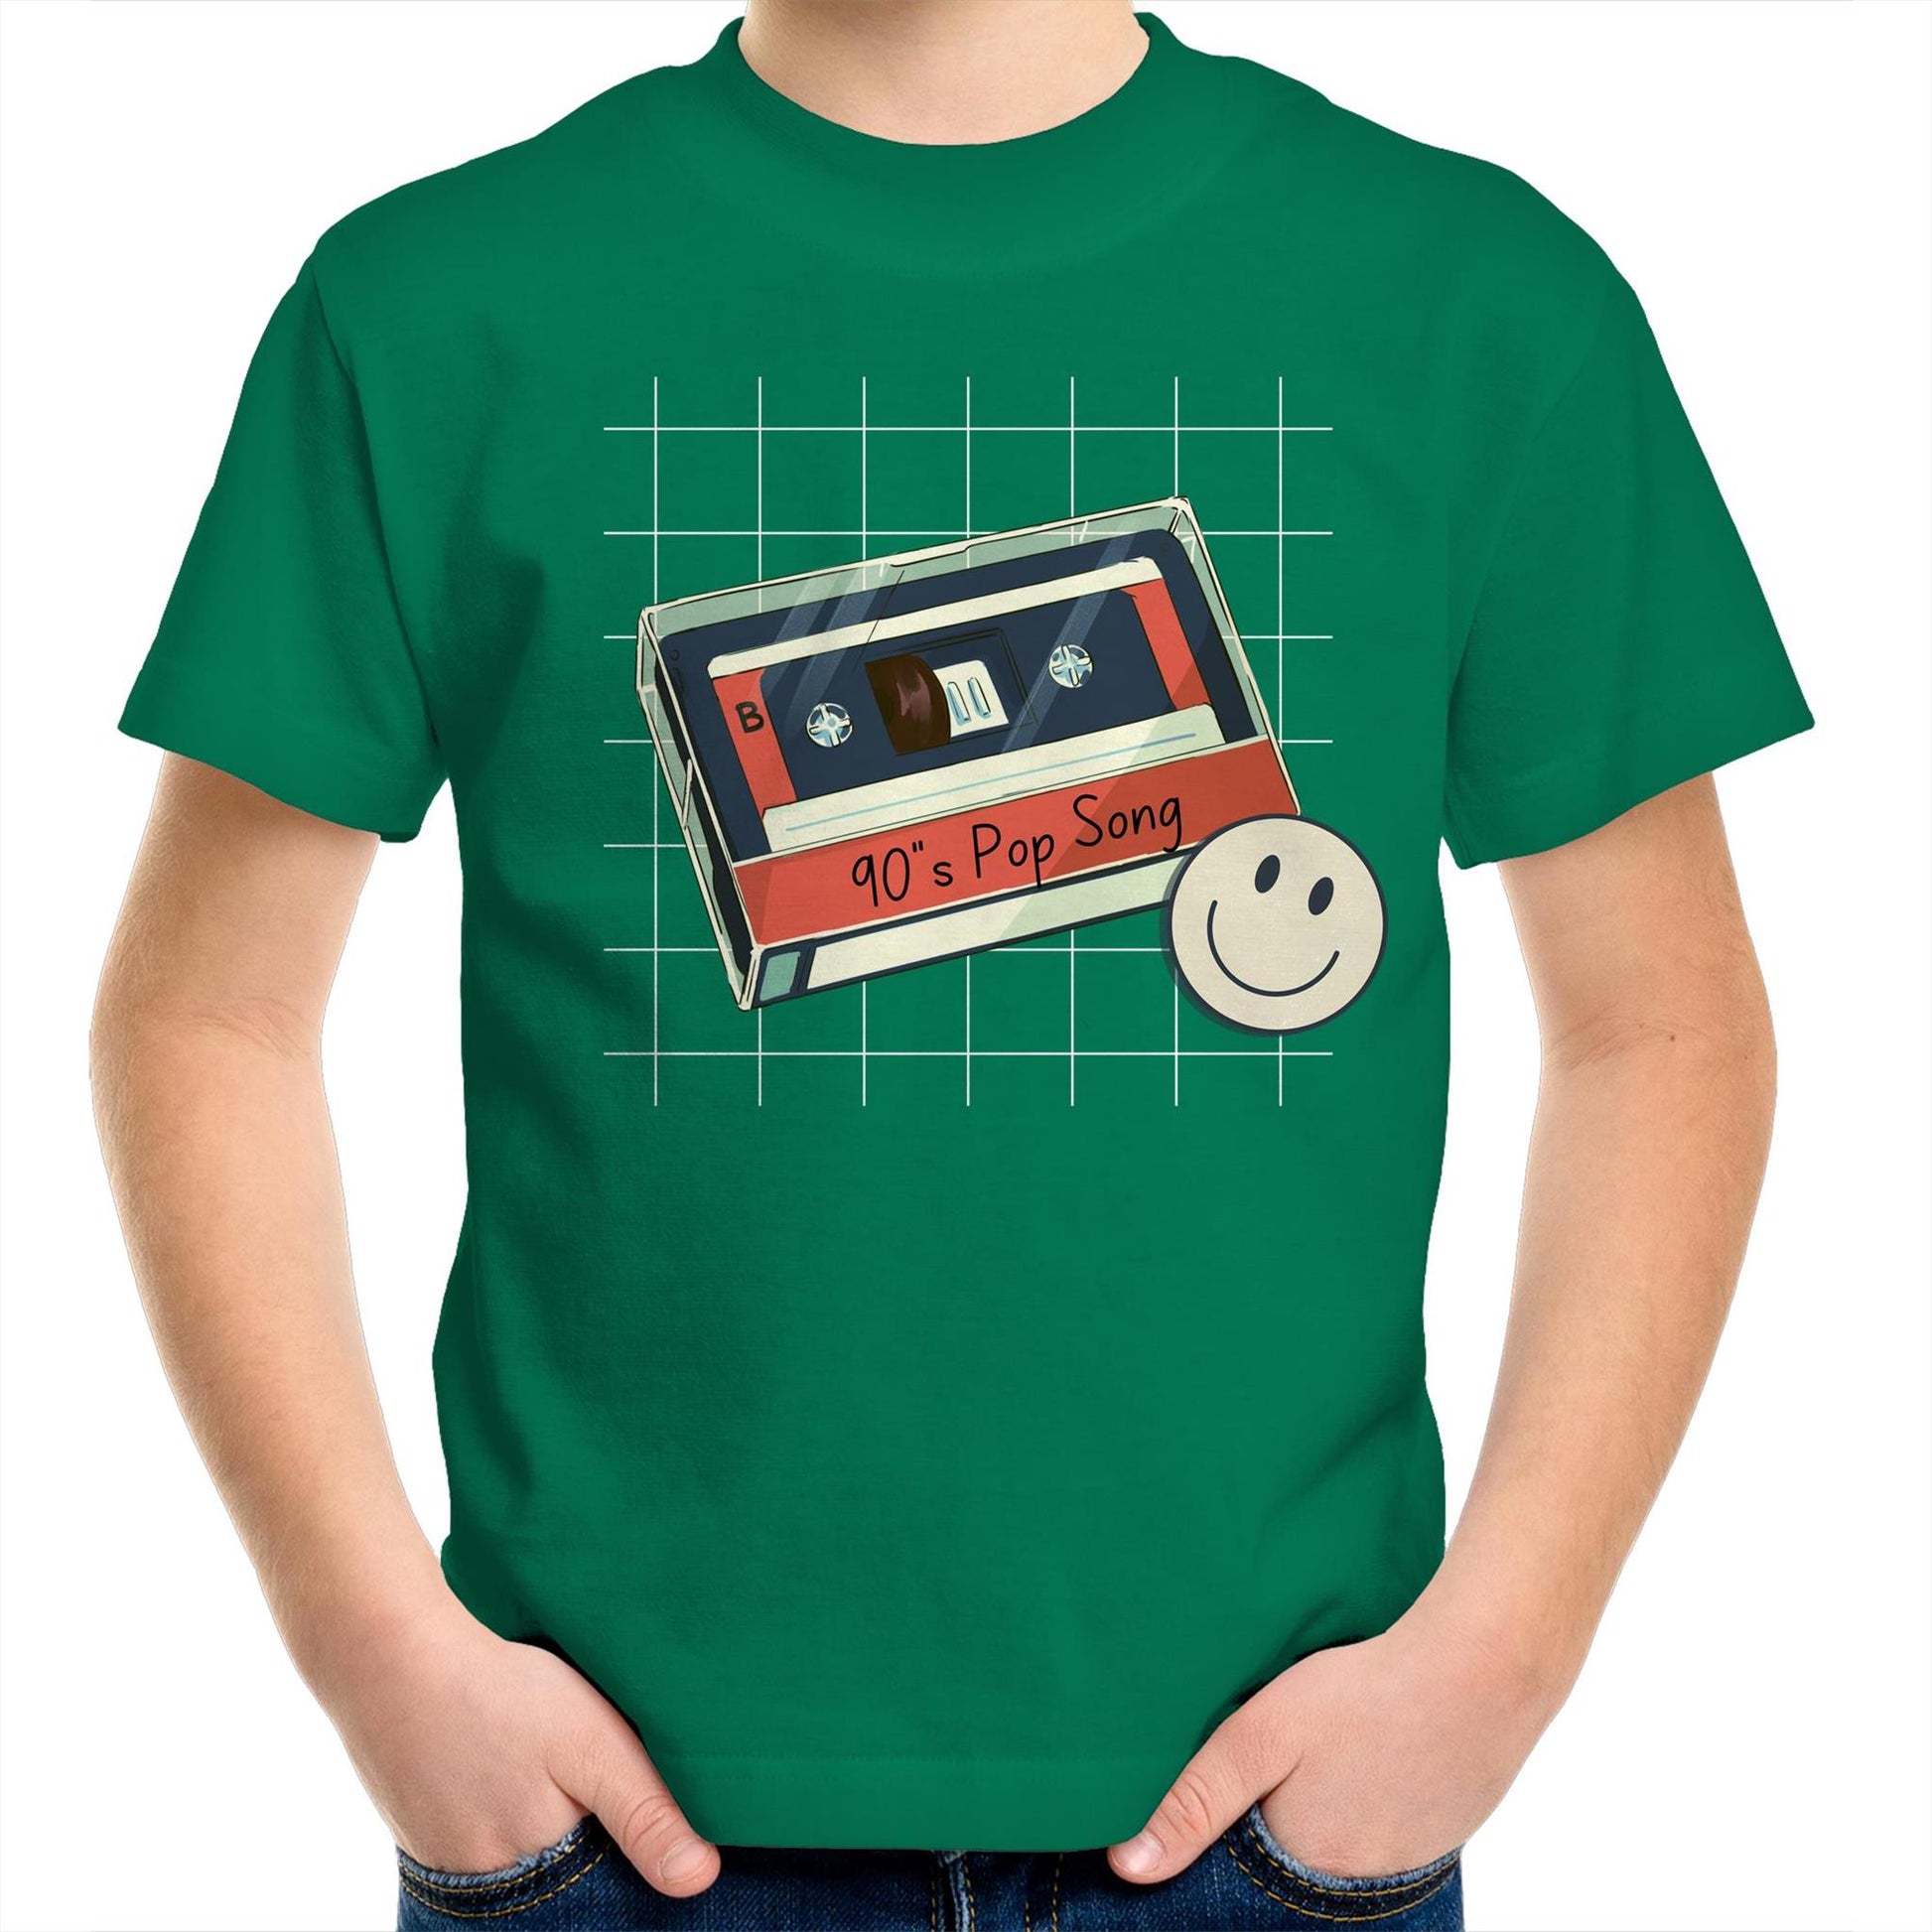 90's Pop Song - Kids Youth Crew T-Shirt Kelly Green Kids Youth T-shirt Music Retro